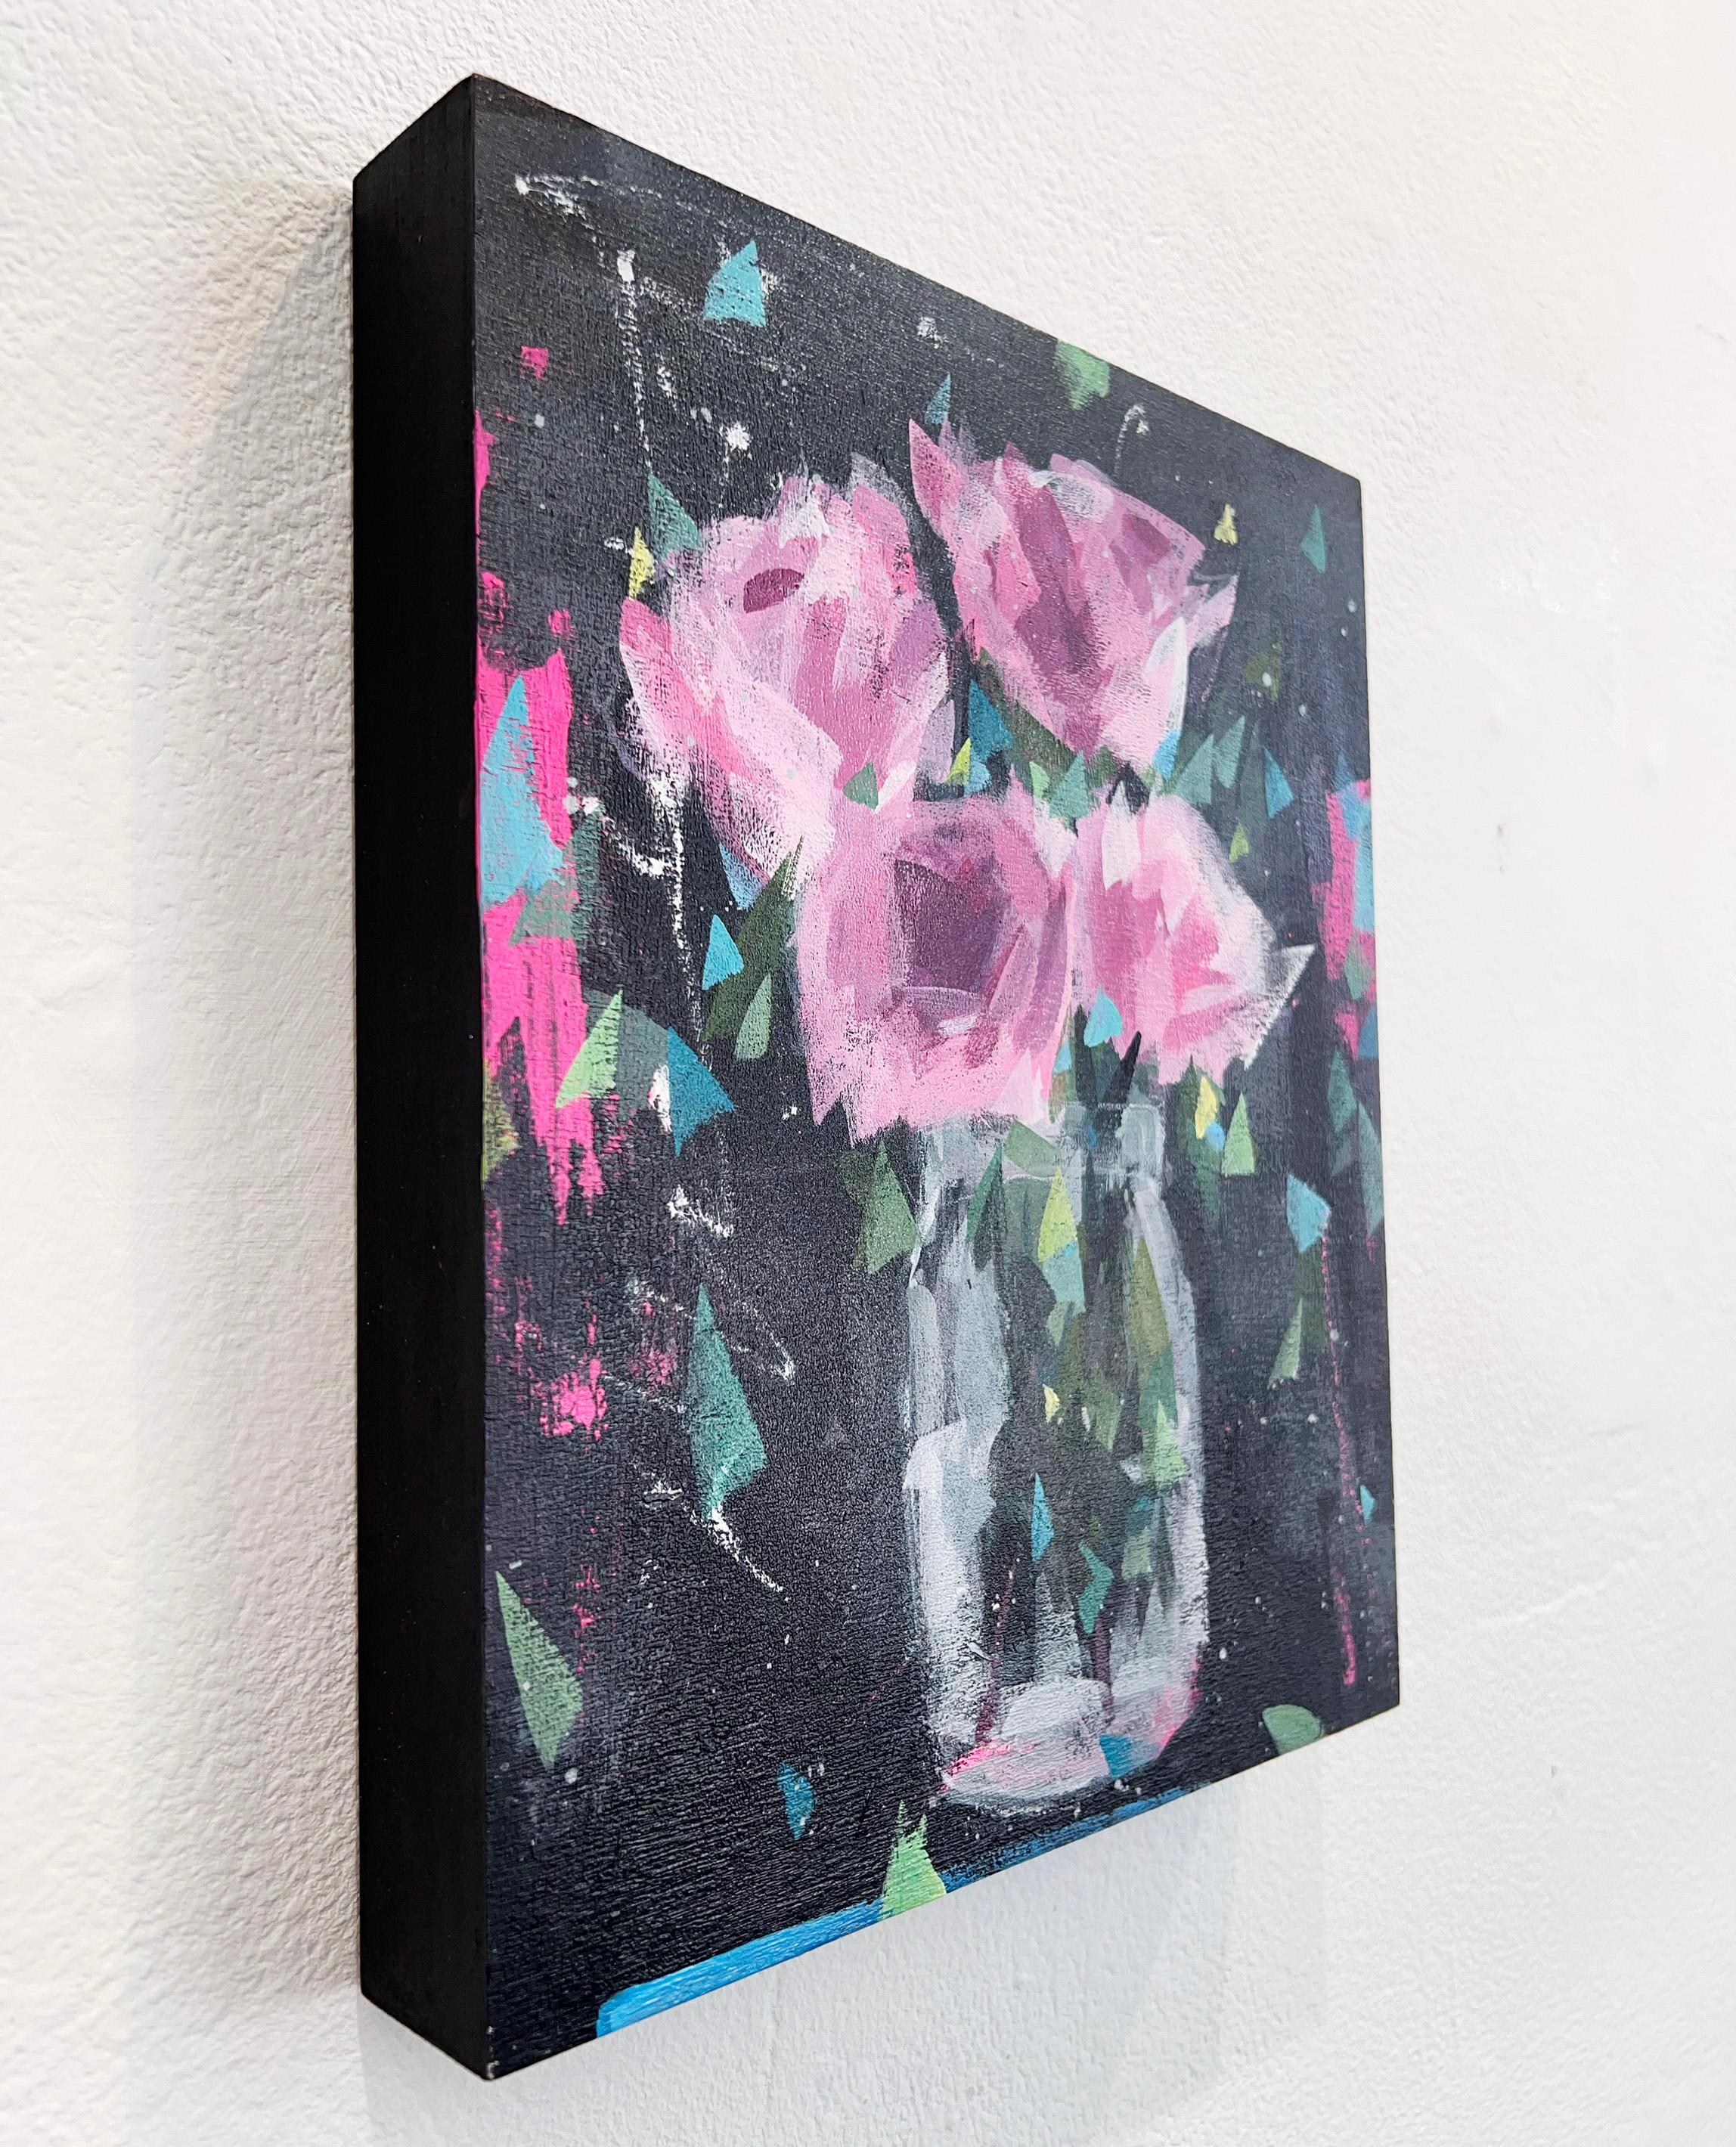 'Reunited' is an impressionist floral painting by urban impressionist painter Steve Javiel. The piece incorporates a blend of acrylic paints and spray paints on a wood panel, measuring 12 x 10 x 1.5 inches in size.

“The strong presence of color in